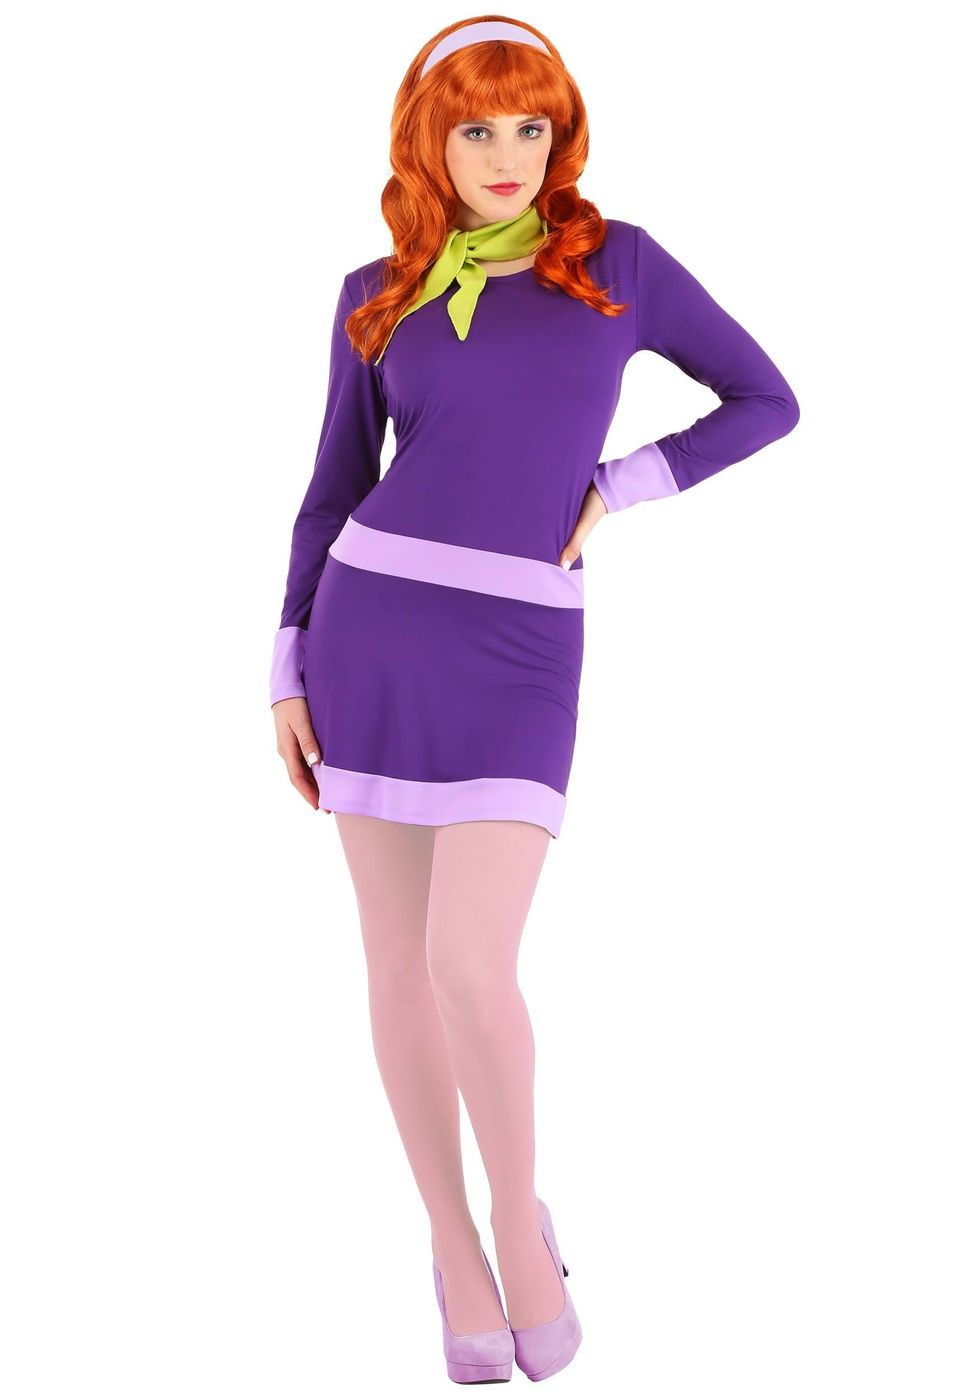 Daphne from "Scooby-Doo"